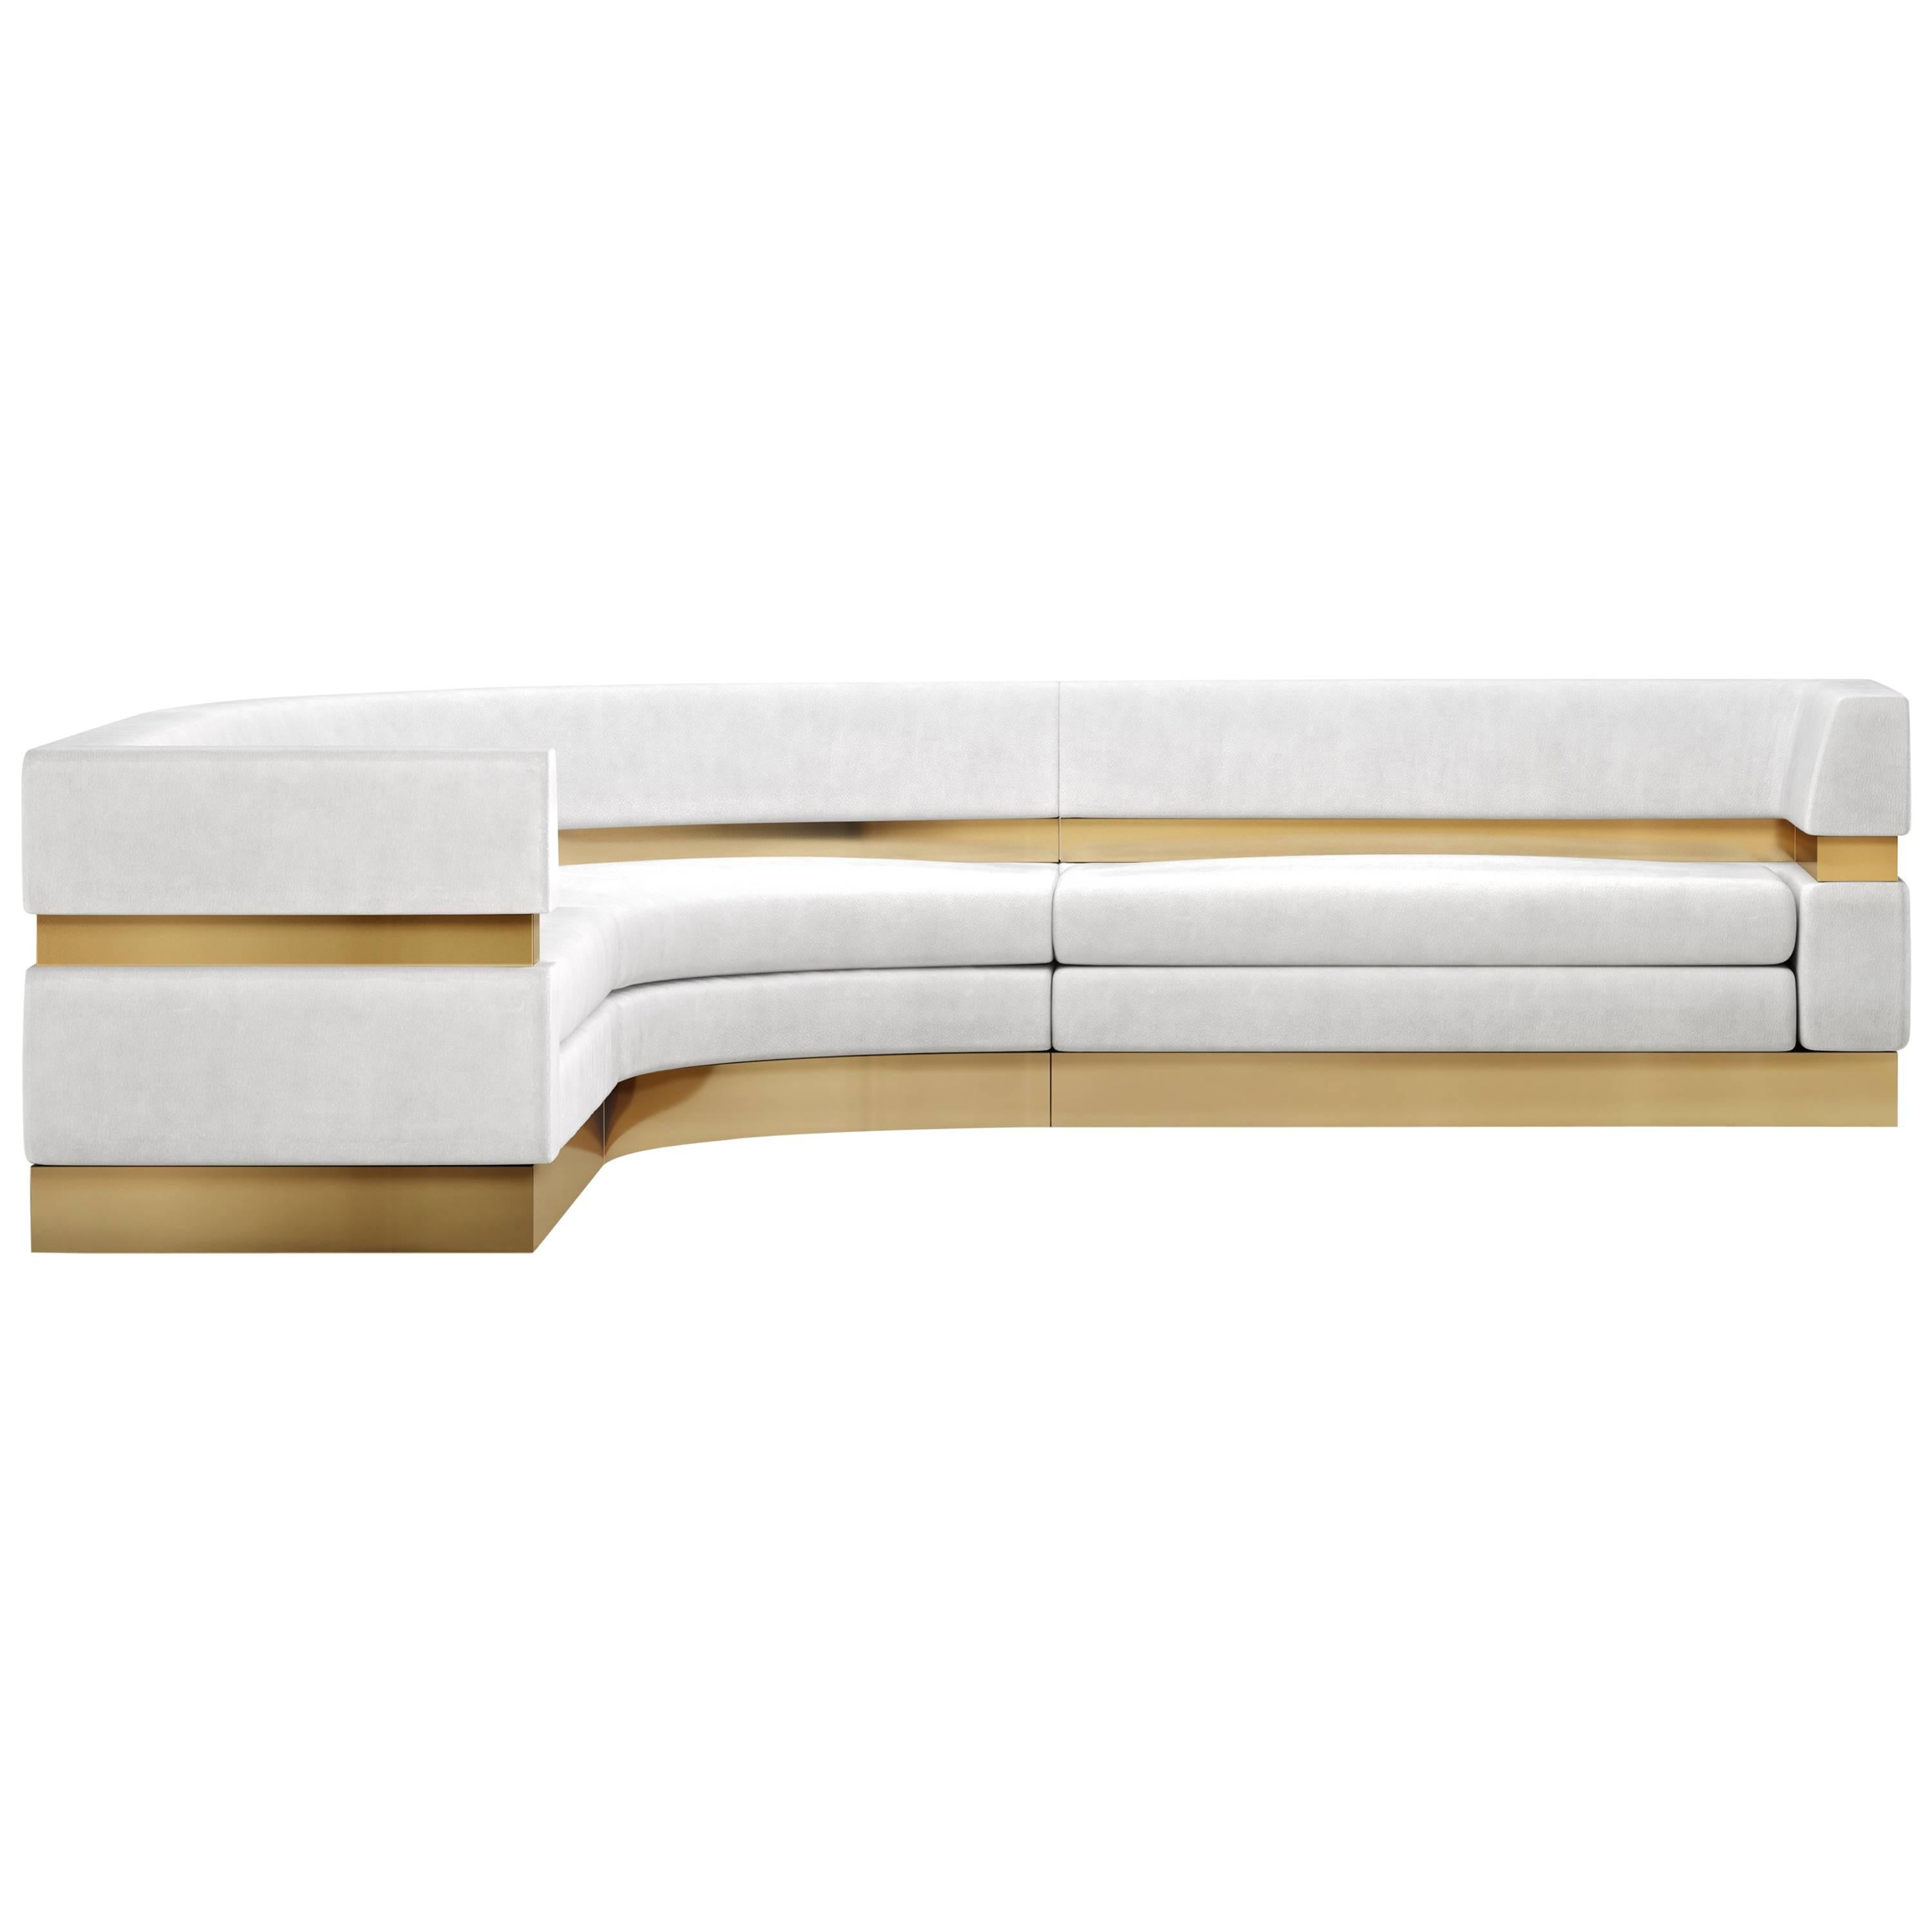 The Cardin Sectional Sofa features layers of upholstery and metal inlay to create a minimal and modern sitting statement.  Fully custom and made to order in California. As shown in Leather $50,680.00  Starting at $34,150.00